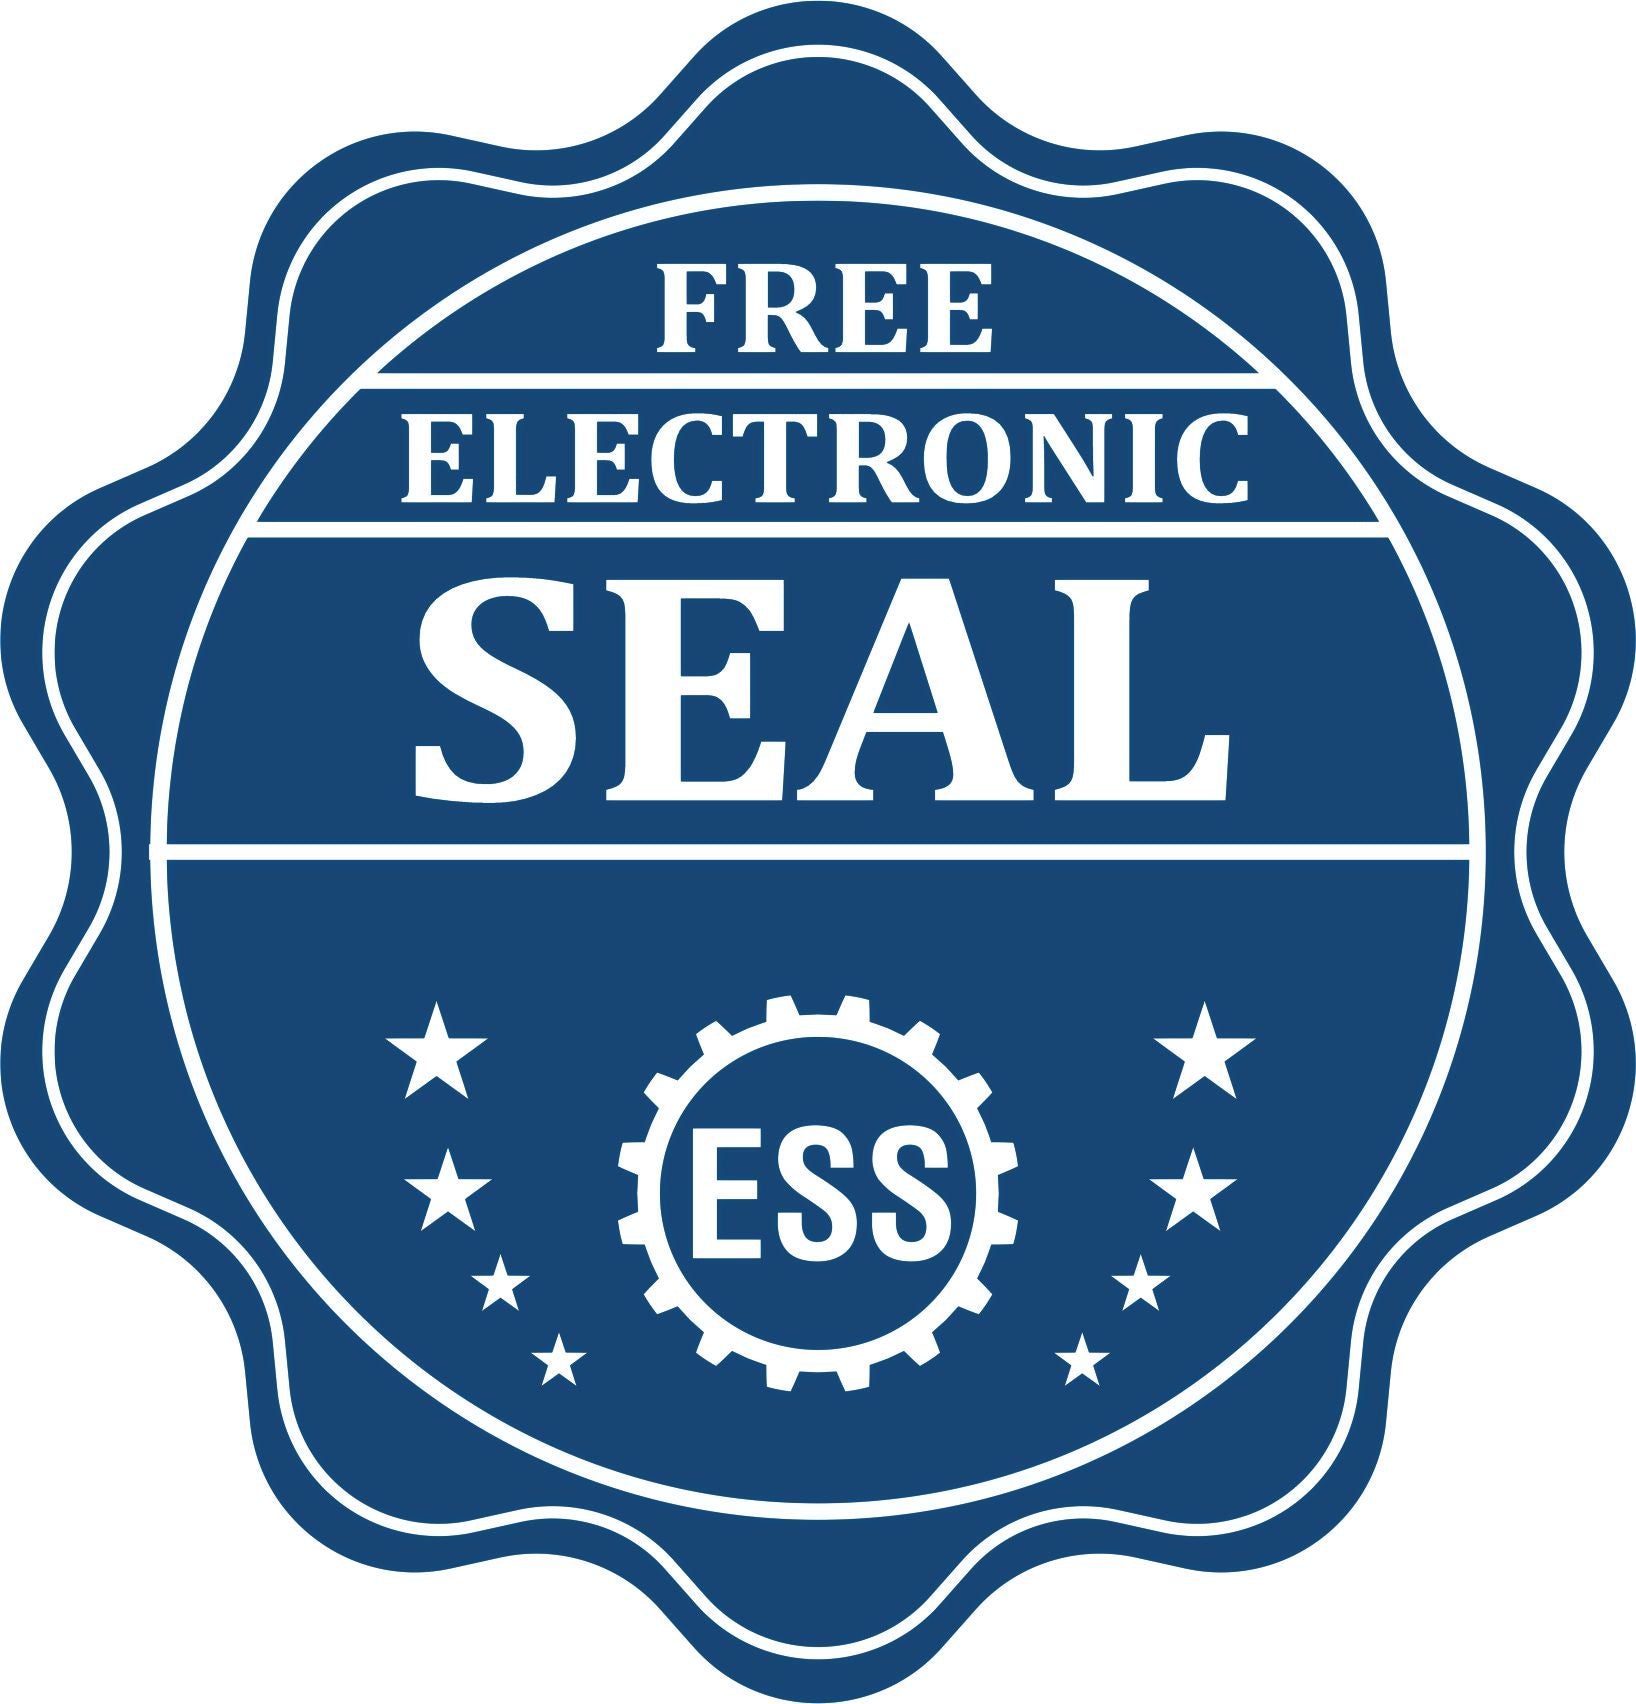 A badge showing a free electronic seal for the Arizona Geologist Desk Seal with stars and the ESS gear on the emblem.